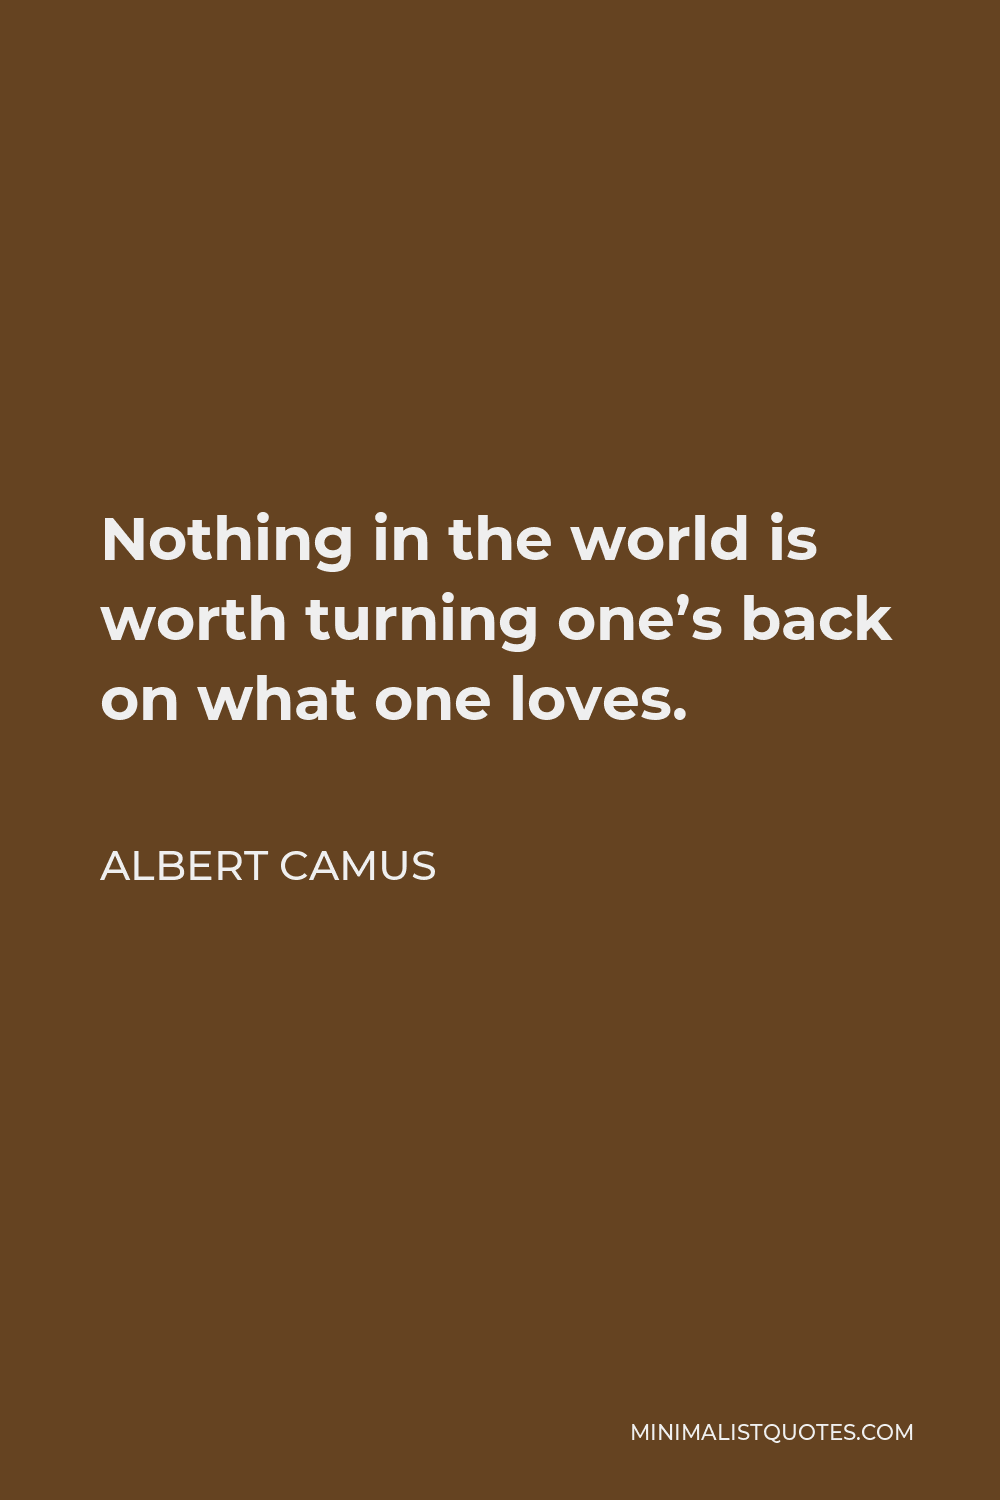 Albert Camus Quote - Nothing in the world is worth turning one’s back on what one loves.